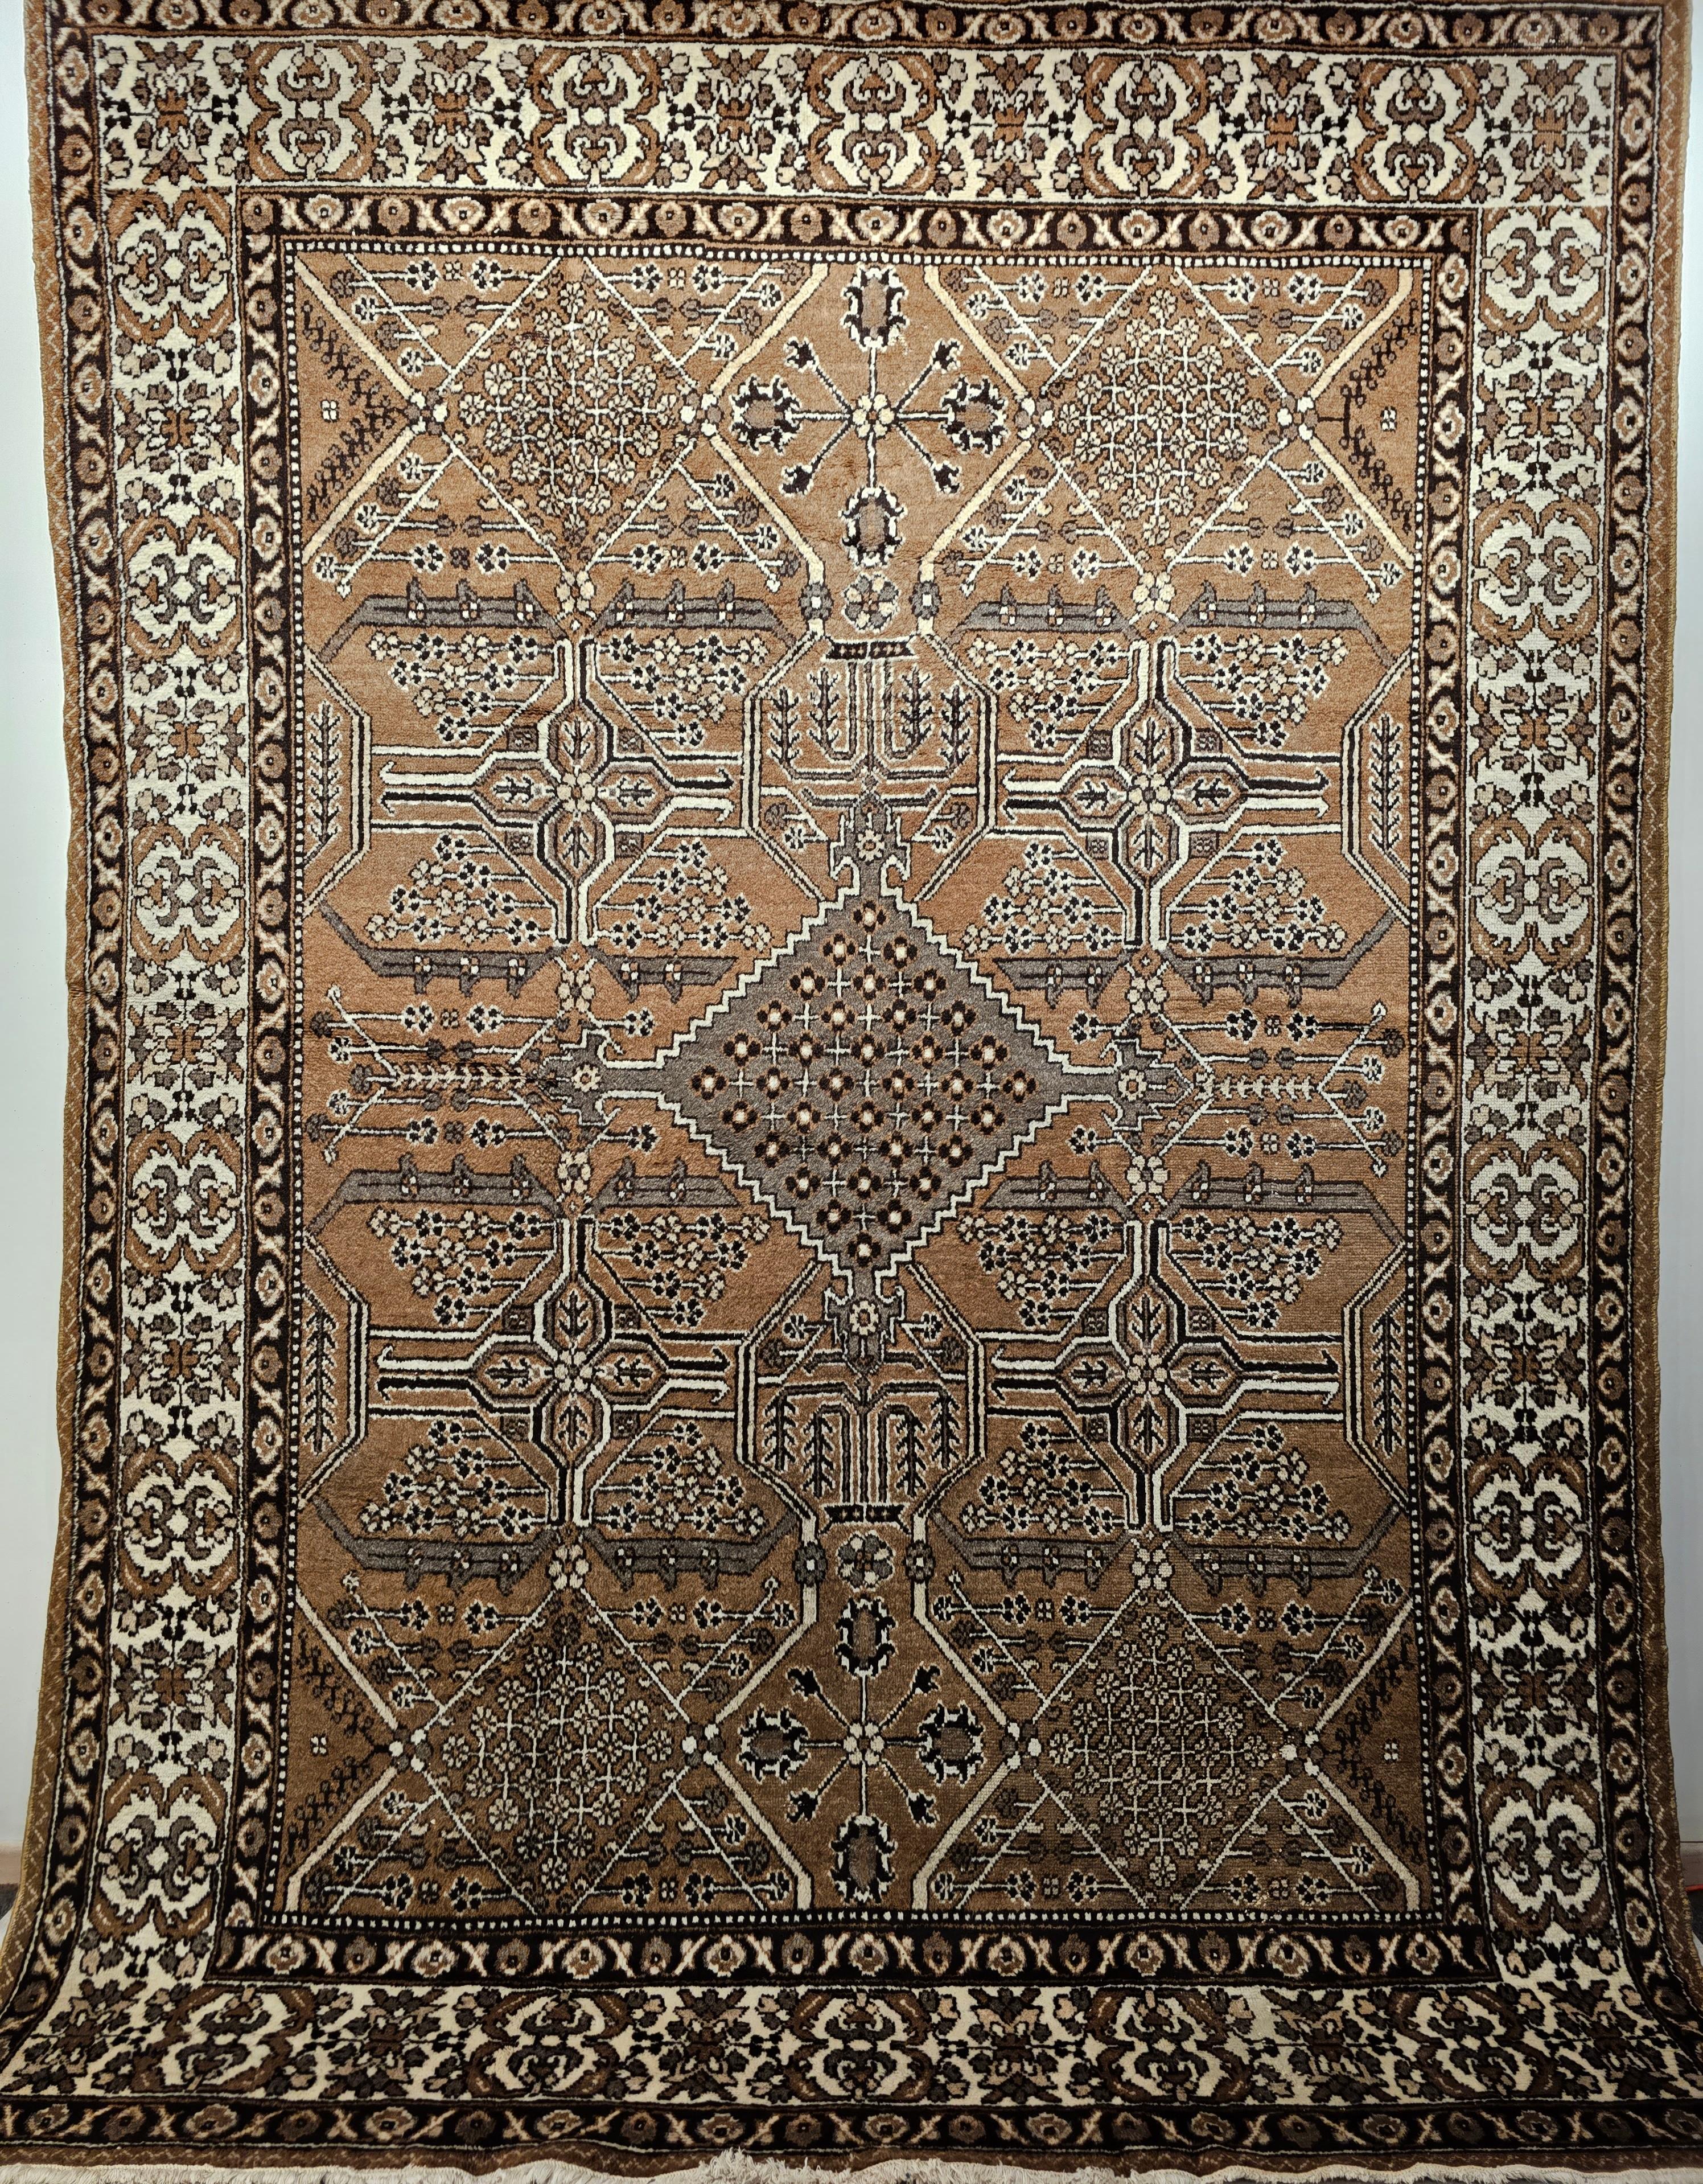 A beautiful vintage Persian Bakhtiari room size rug in an all over geometric pattern with natural wool colors including camelhair, ivory, dark gray, and black.  This Bakhtiari rug was hand woven by the Bakhtiari tribes in the western Persia in the